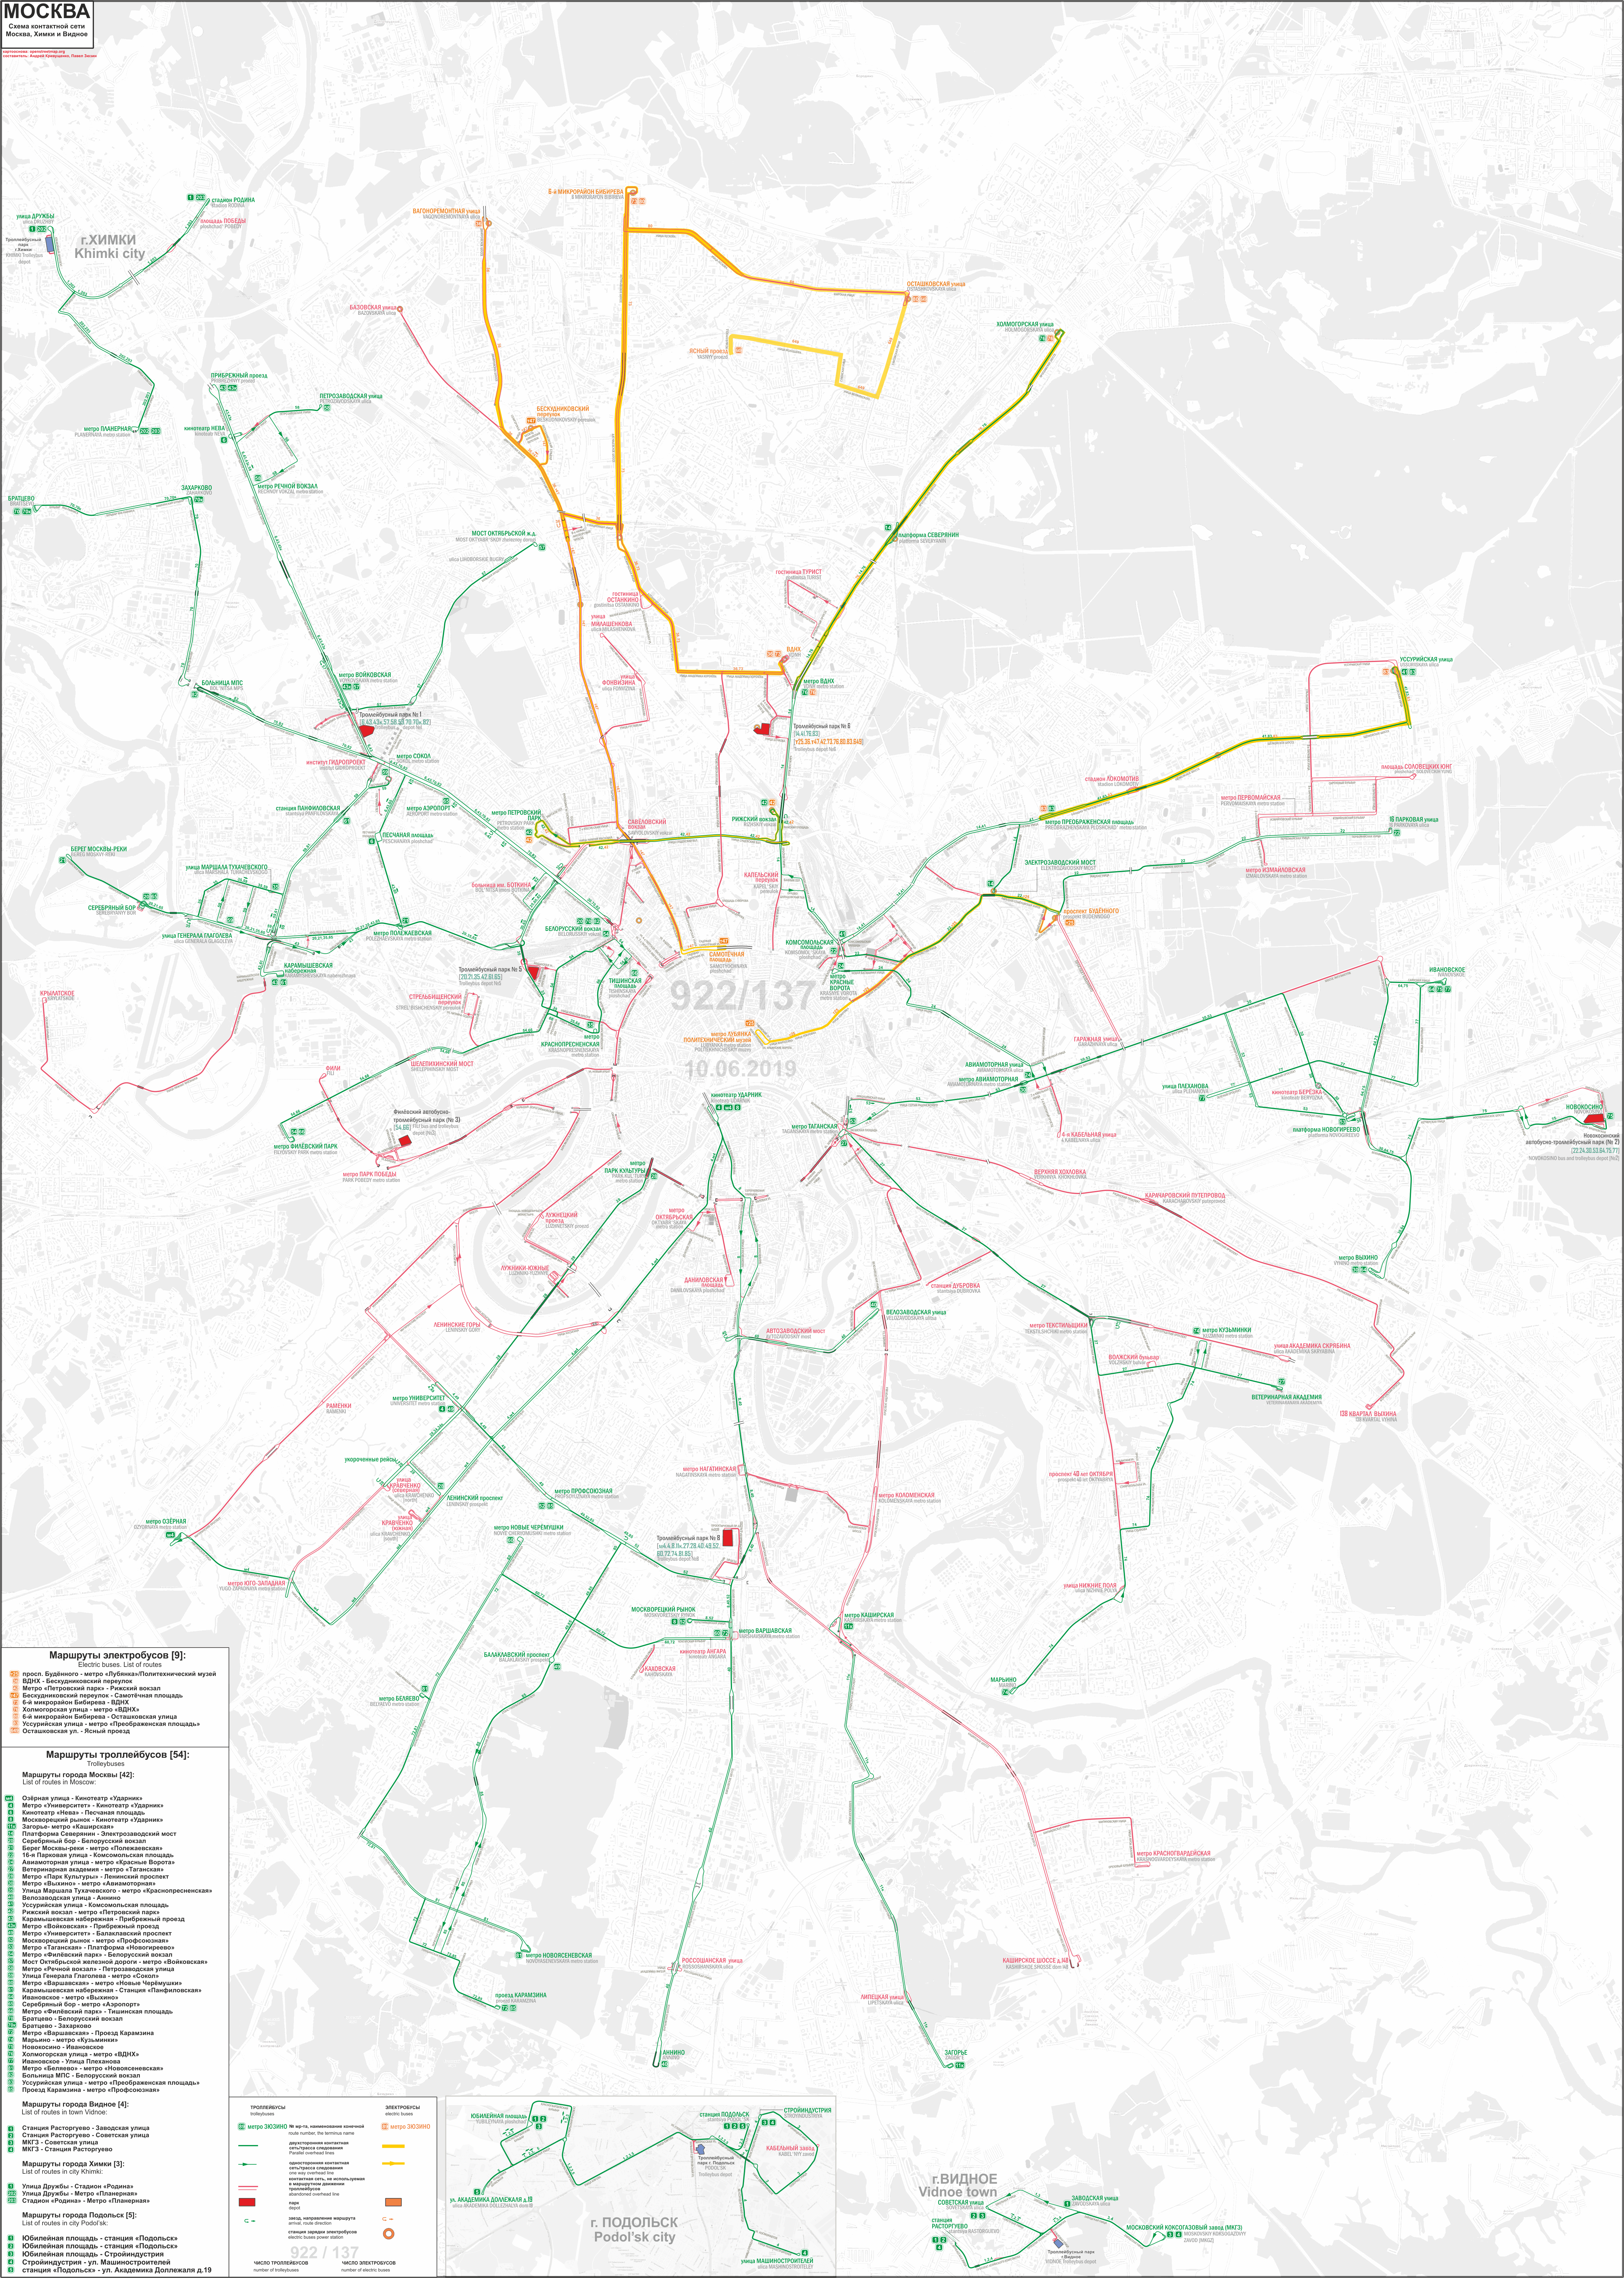 Moscou — Citywide Maps; Moscou — Tramway and Trolleybus Infrastructure Maps